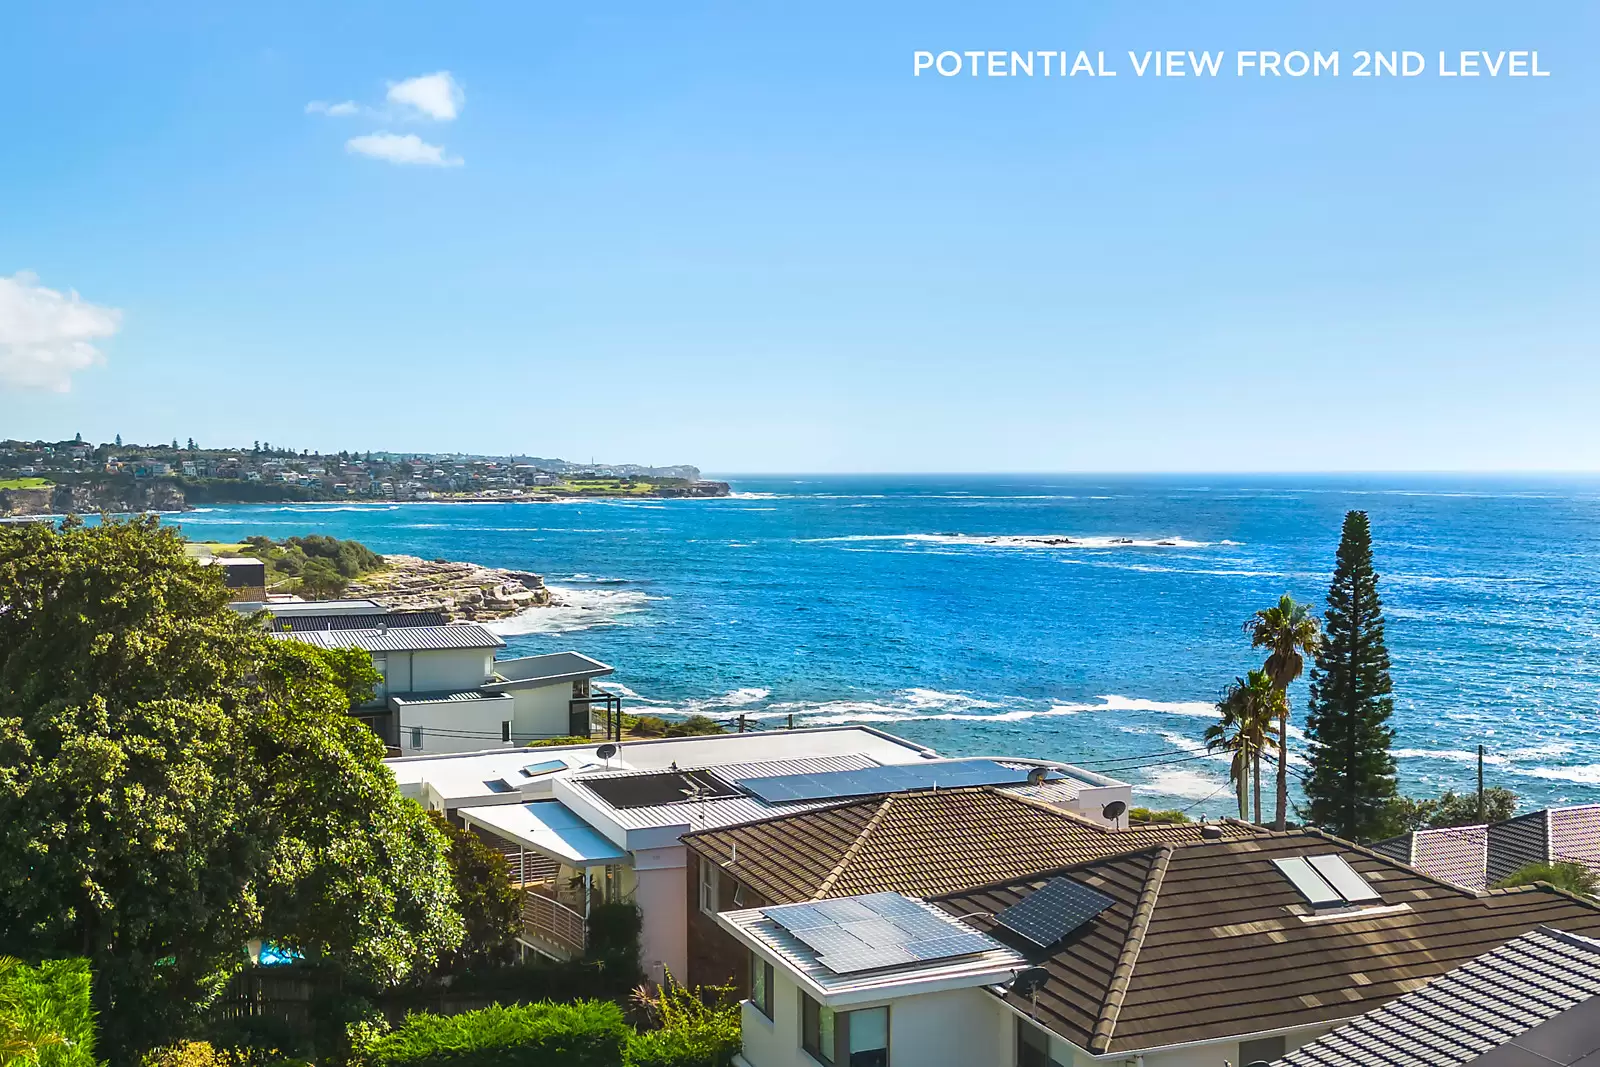 Photo #12: 4 Pearce Street, South Coogee - Auction by Sydney Sotheby's International Realty